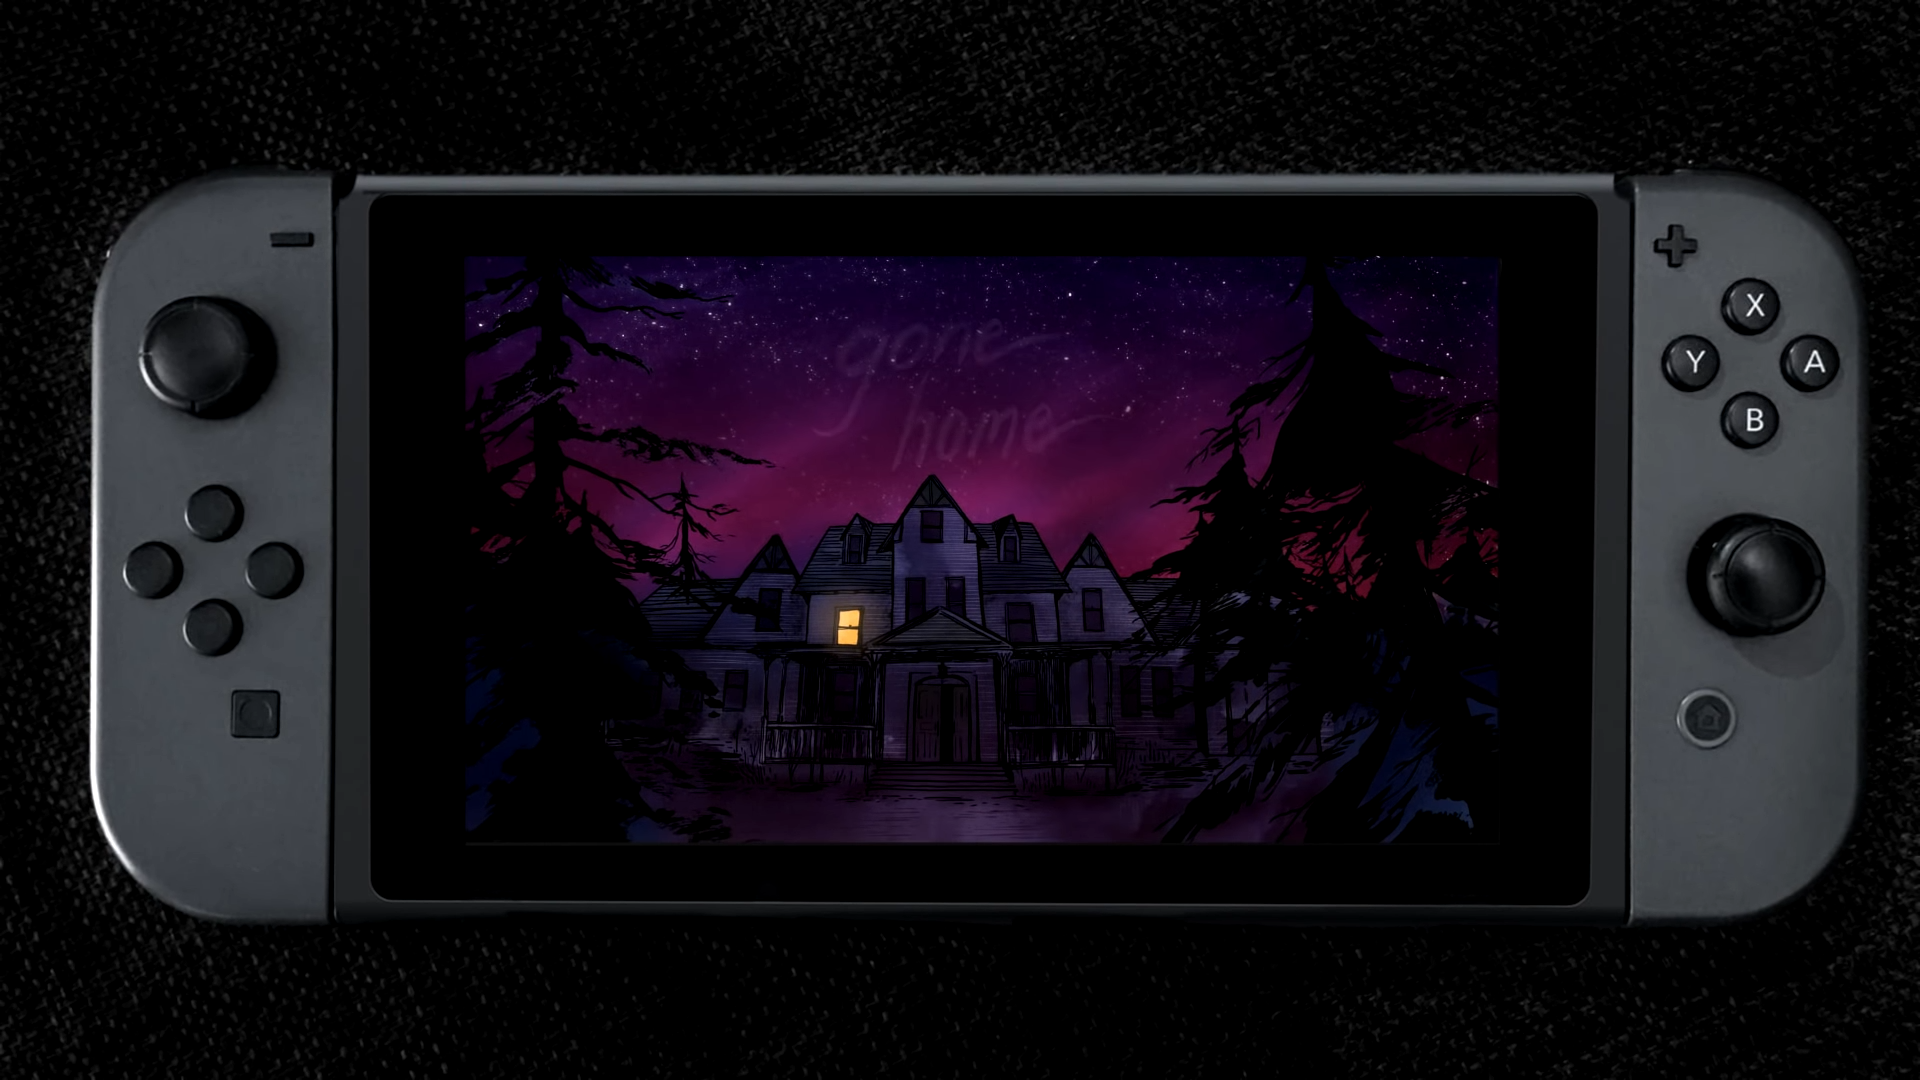 Going home игра. Gone Home. Home игра. Нинтендо Home. Gone Home (2013).